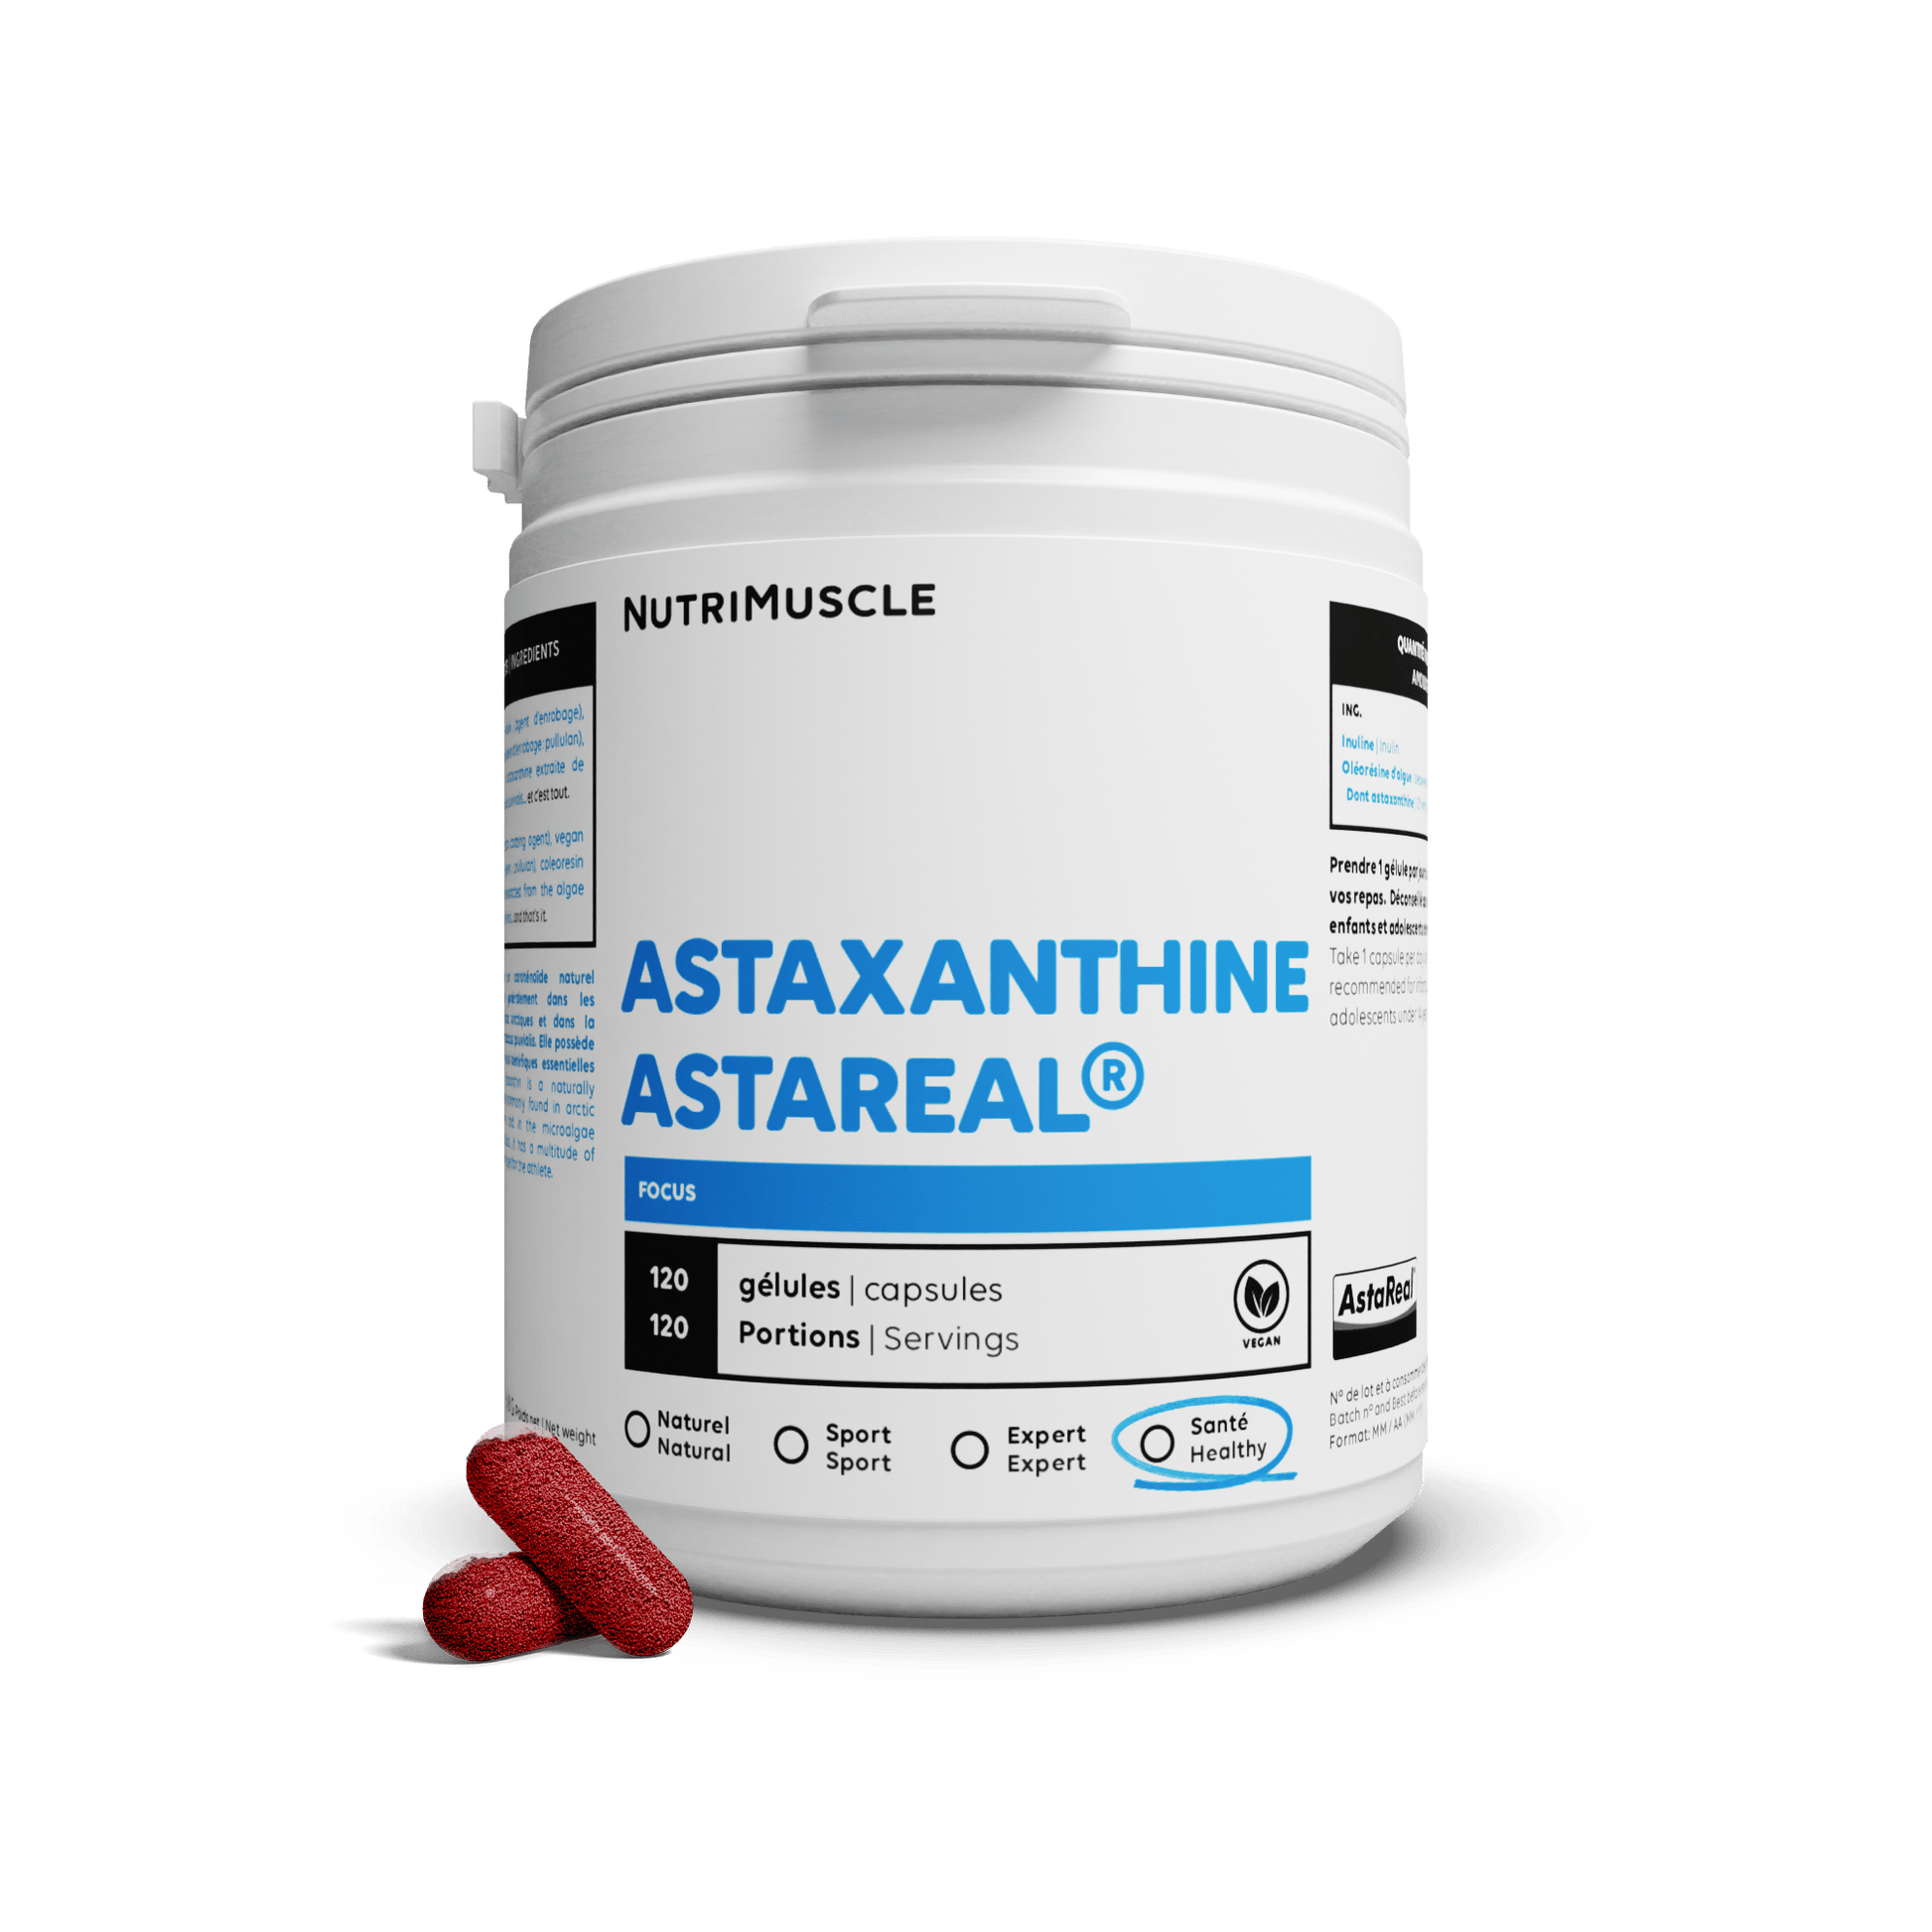 Nutrimuscle Nutriments 120 gélules Astaxanthine Astareal®